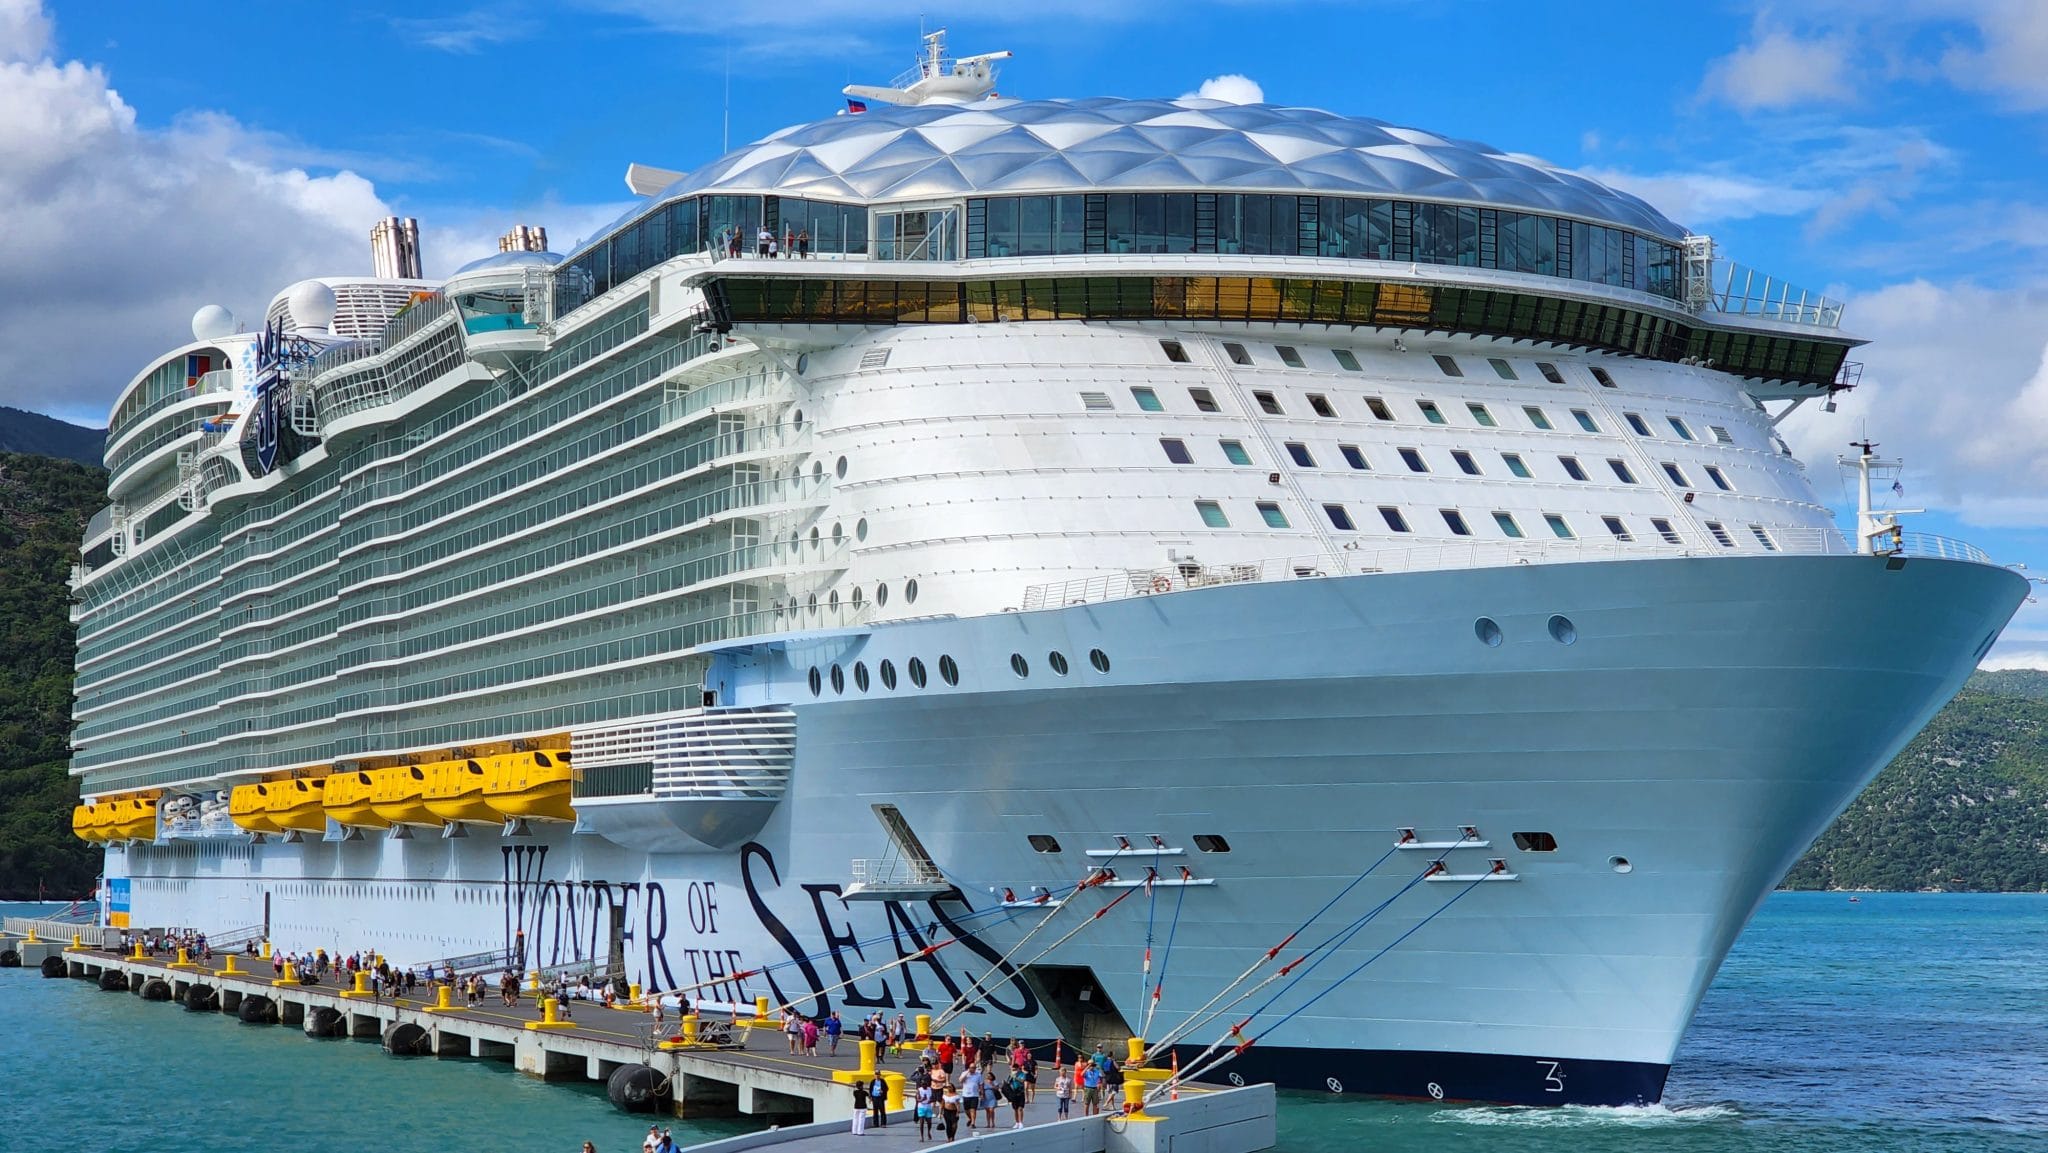 Wonder of the Seas Review: Royal Caribbean's Newest and Largest Cruise Ship